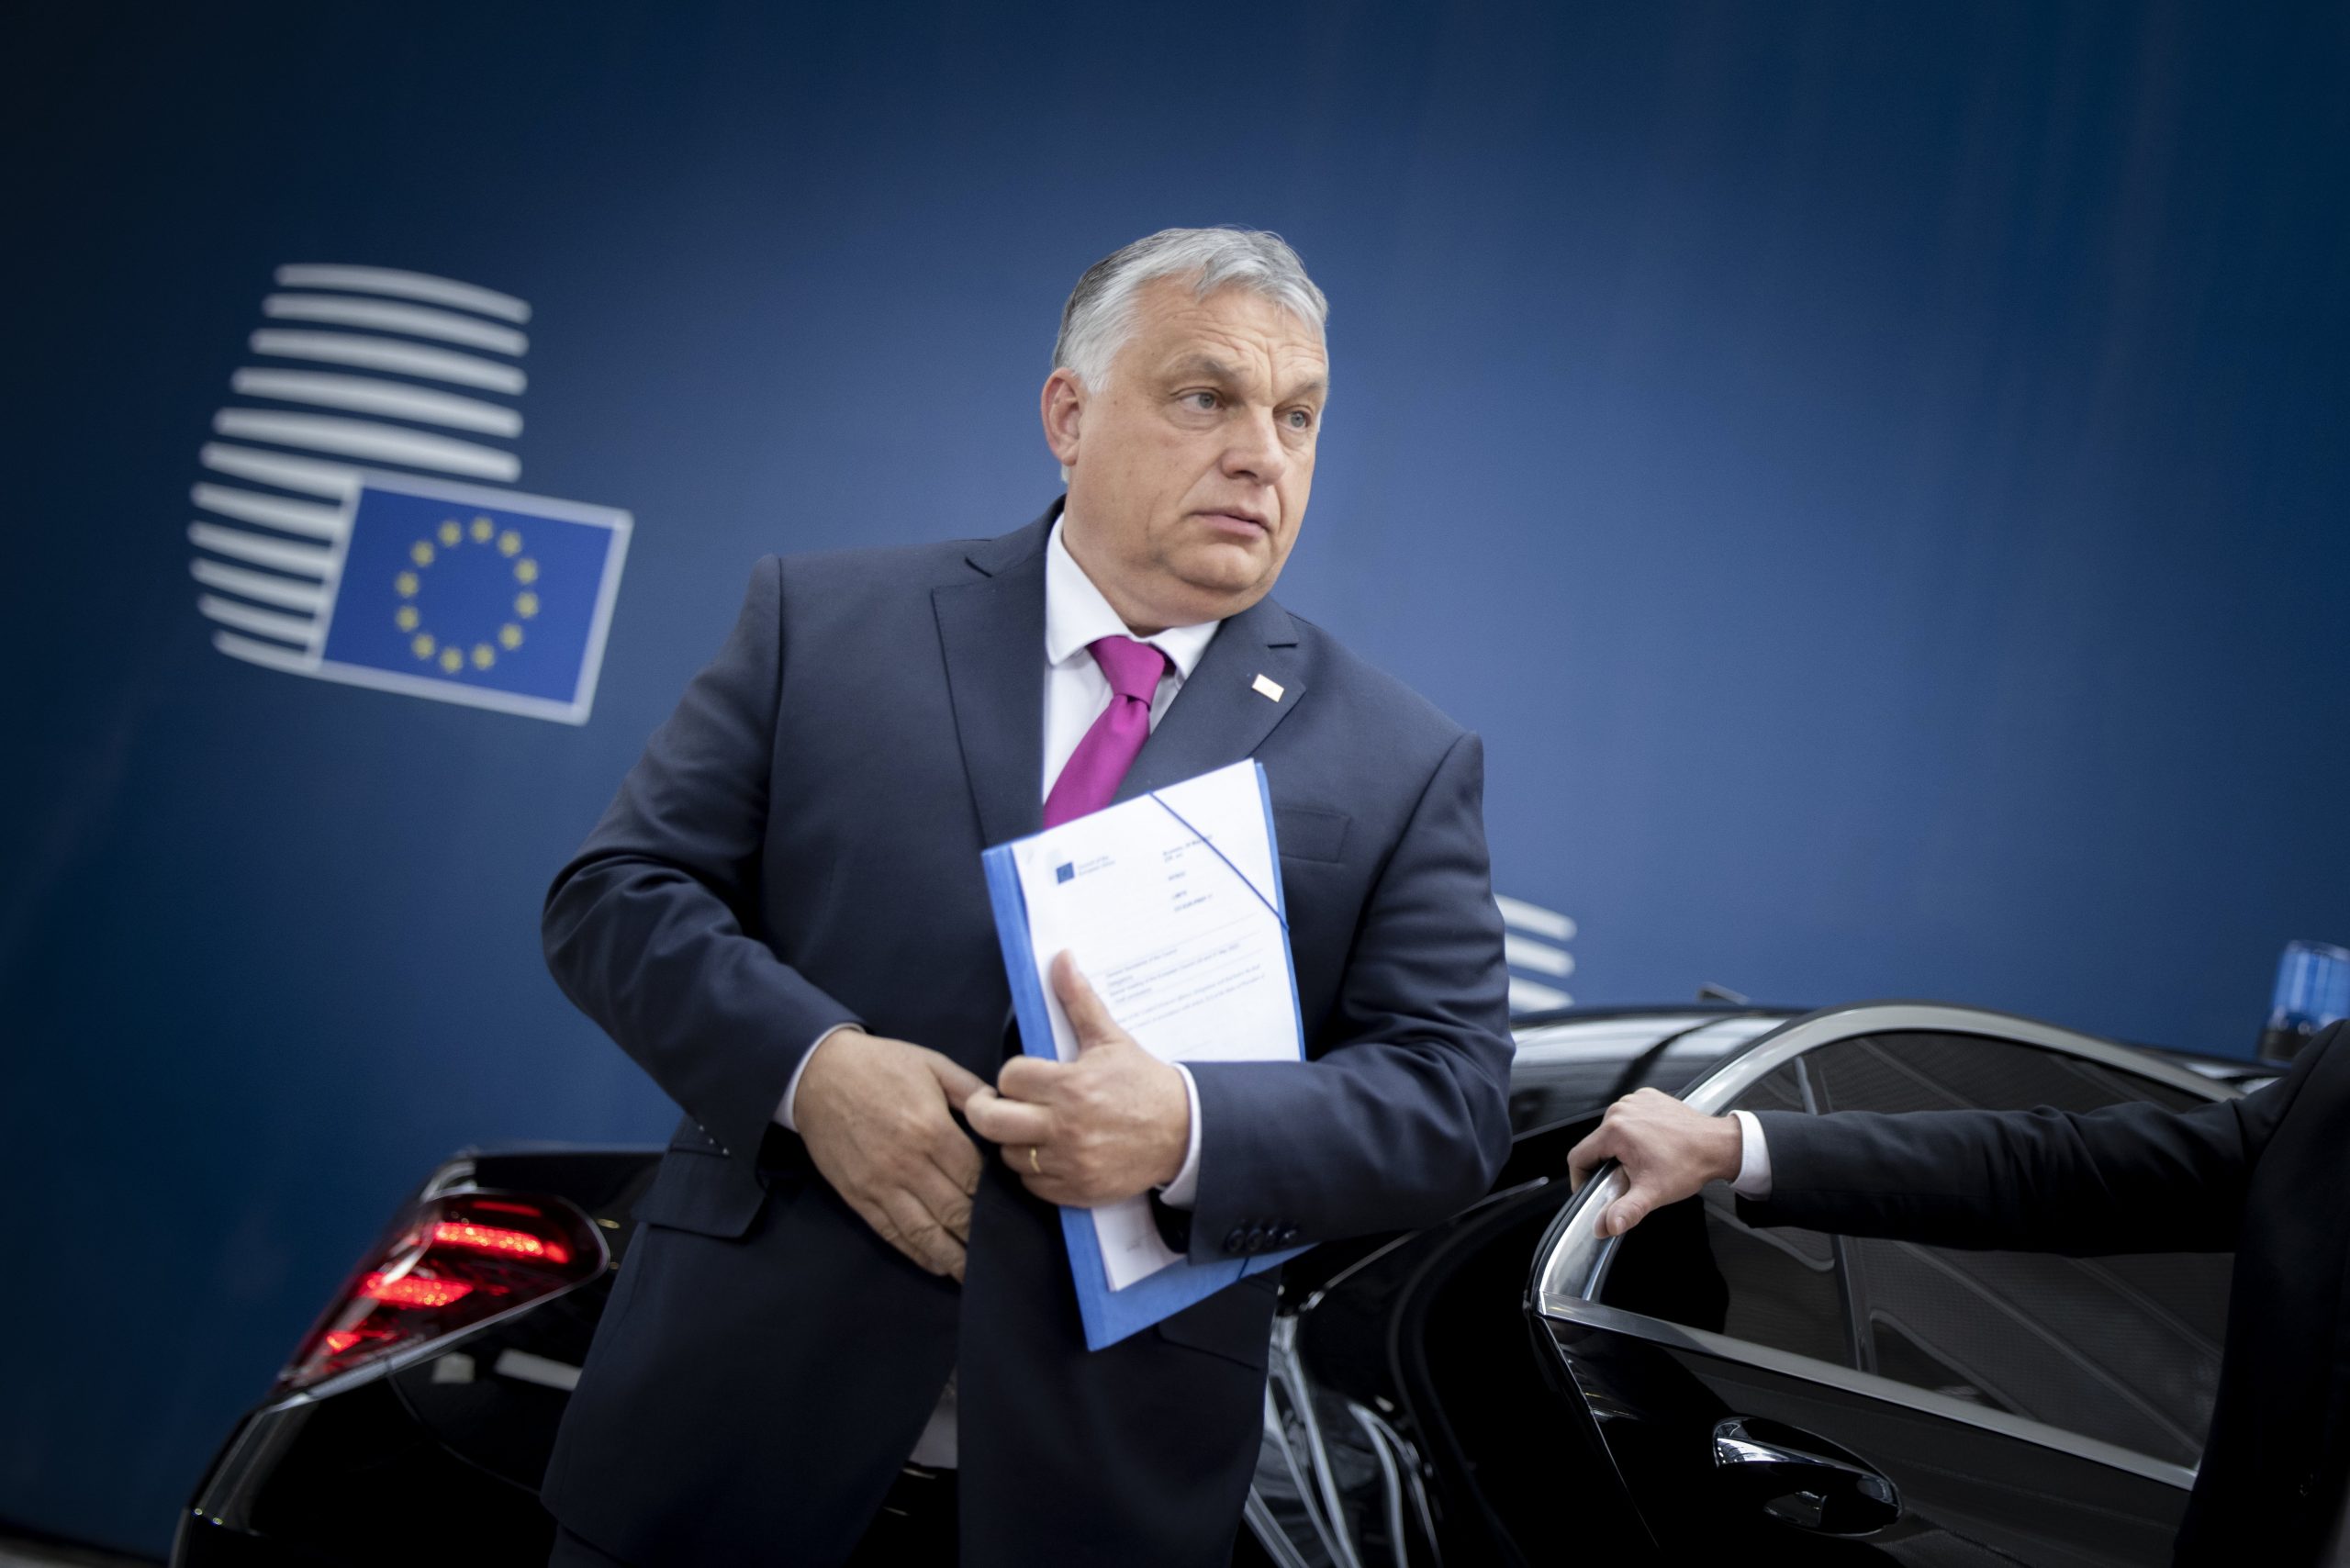 Viktor Orbán to MEPs: Hungary Remains Opposed to Proposals Threatening Impoverishment of Families